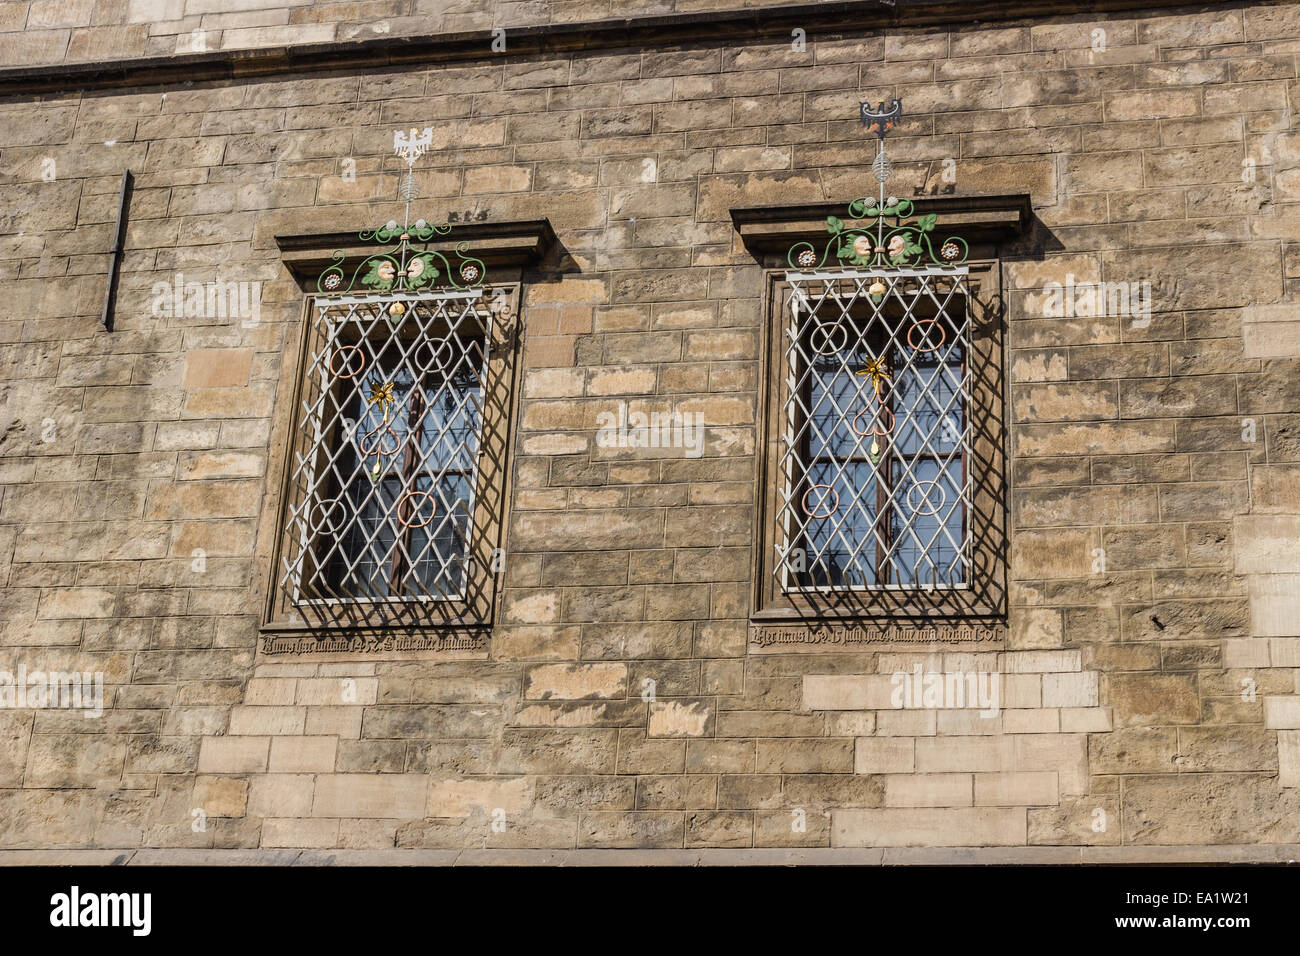 Buildings  and houses in the historical center of Prague. Architecture details: iron gratied windows Stock Photo